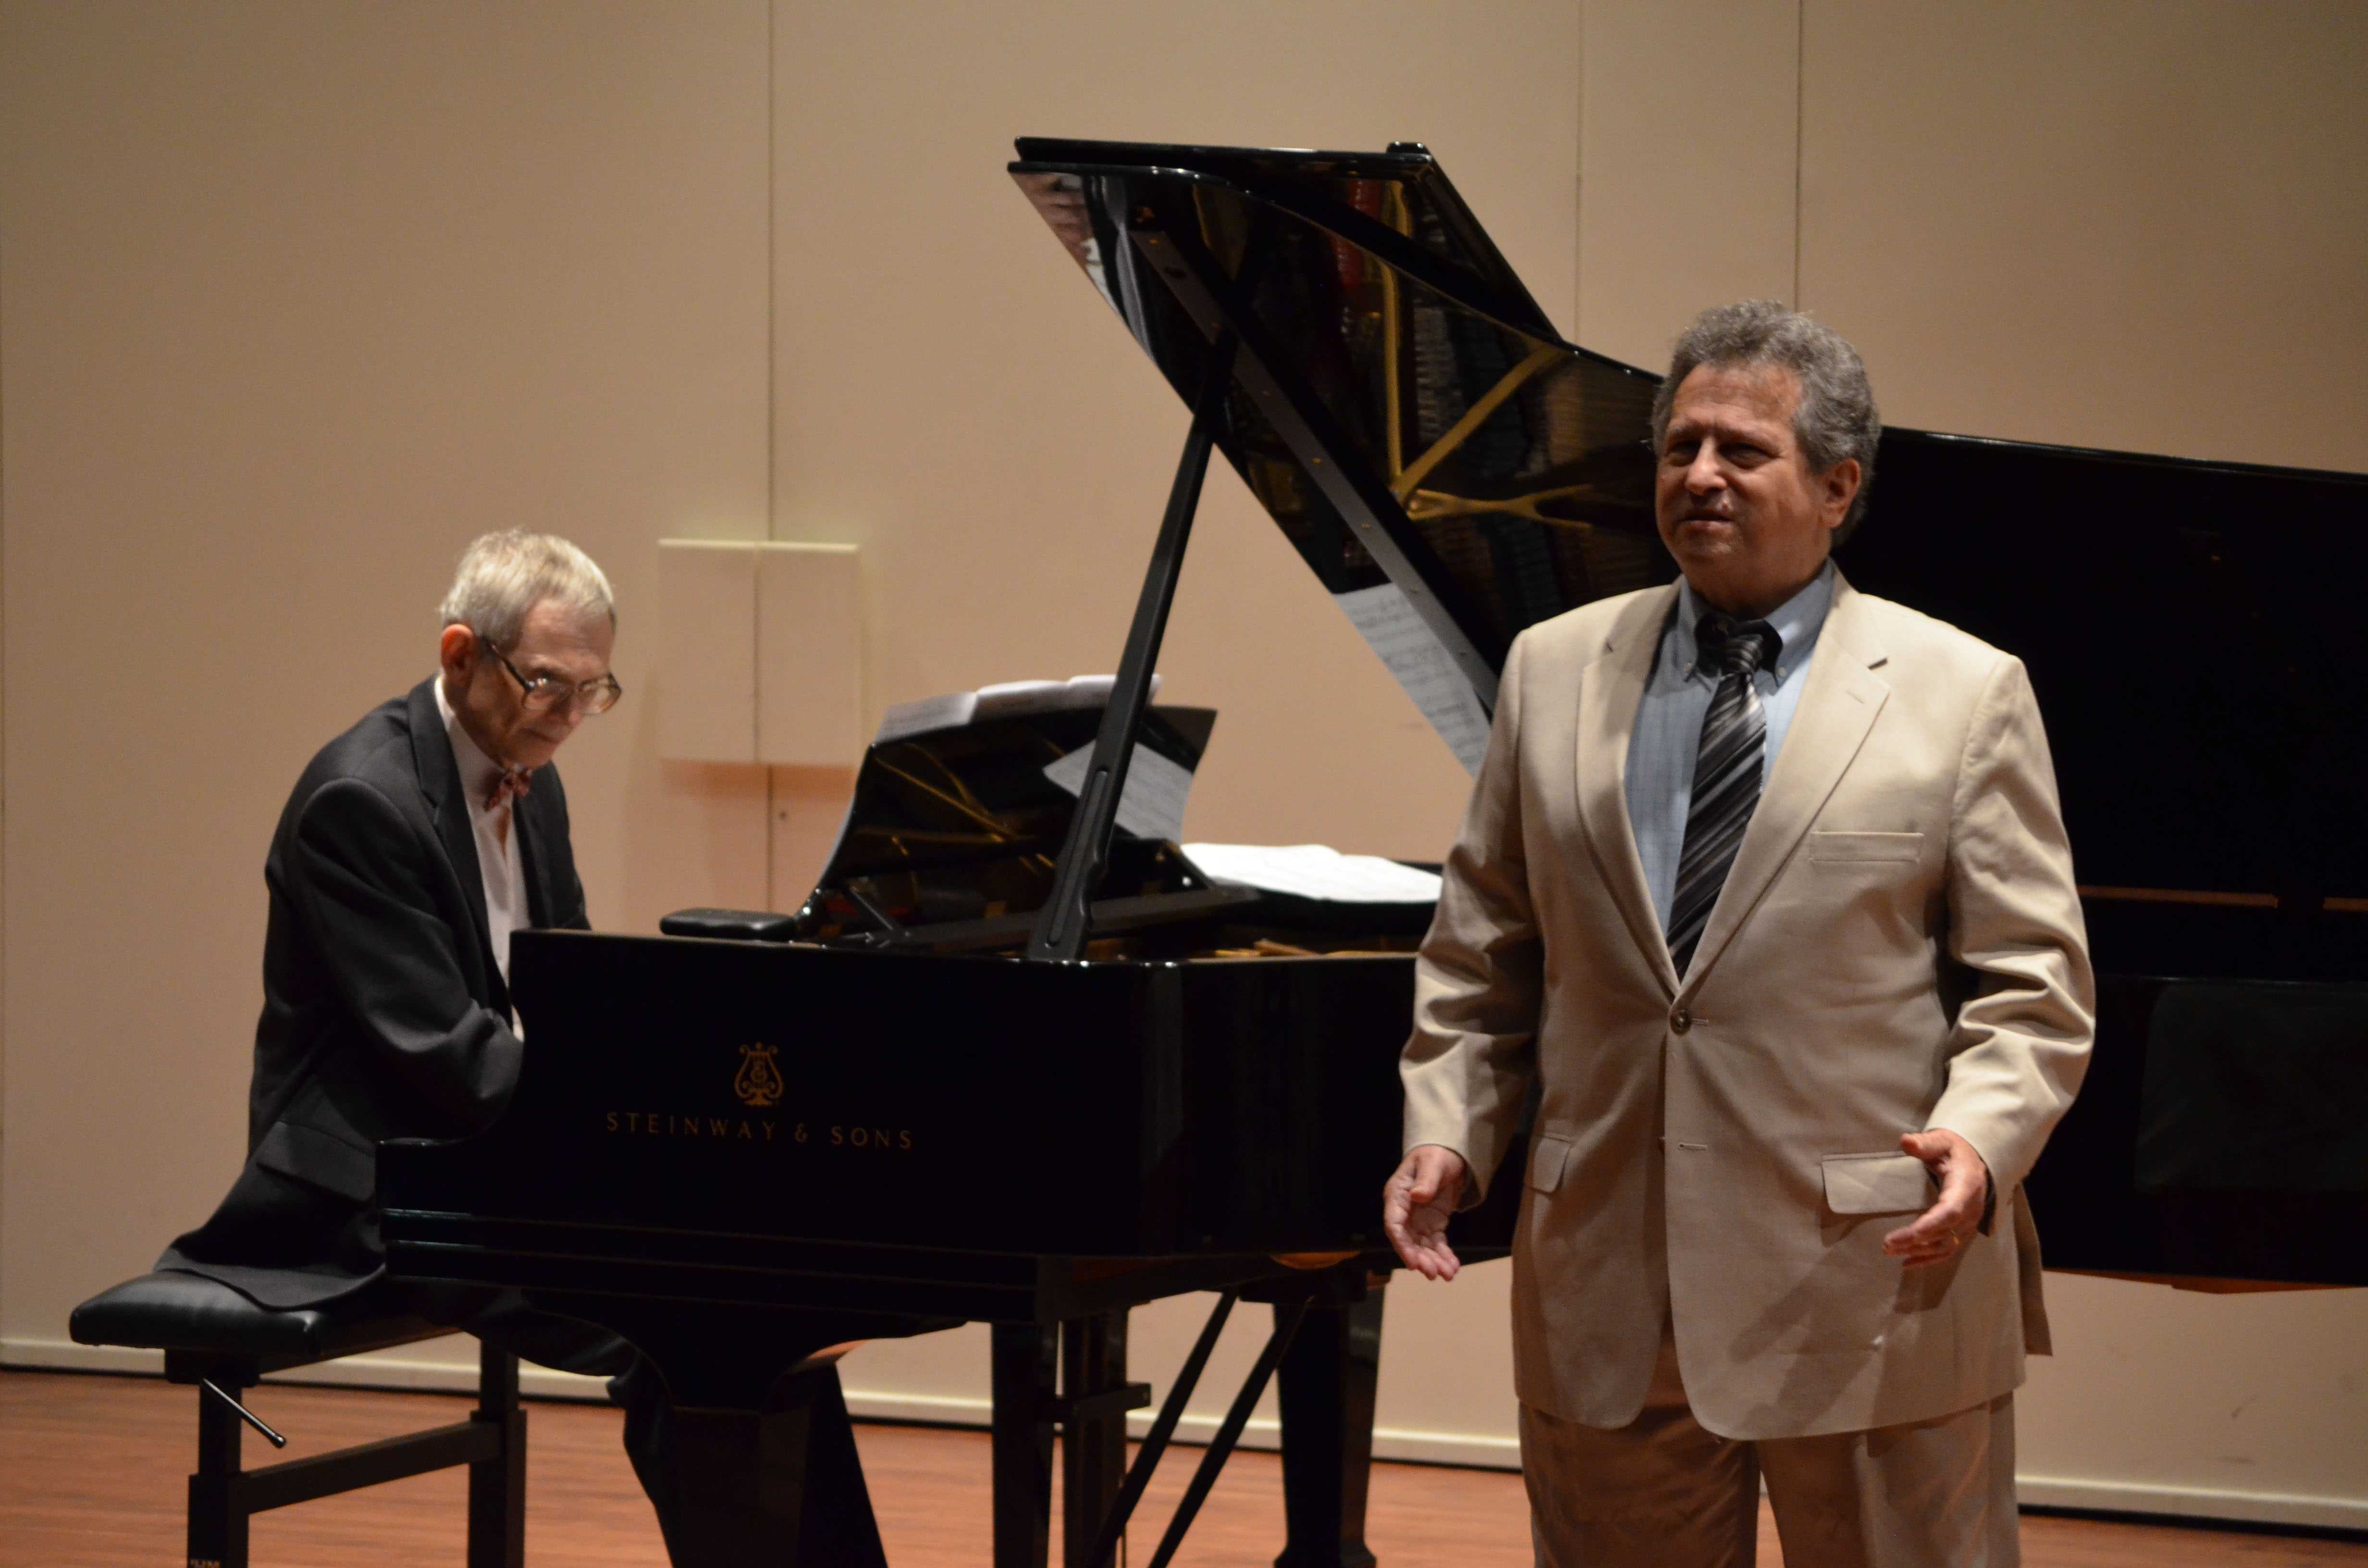 Tenor singer Lawrence Bakst (right) accompanied Zimdars (left) on stage for their performance of von Sabinin’s work. (Anthony Martinez/The Sundial)